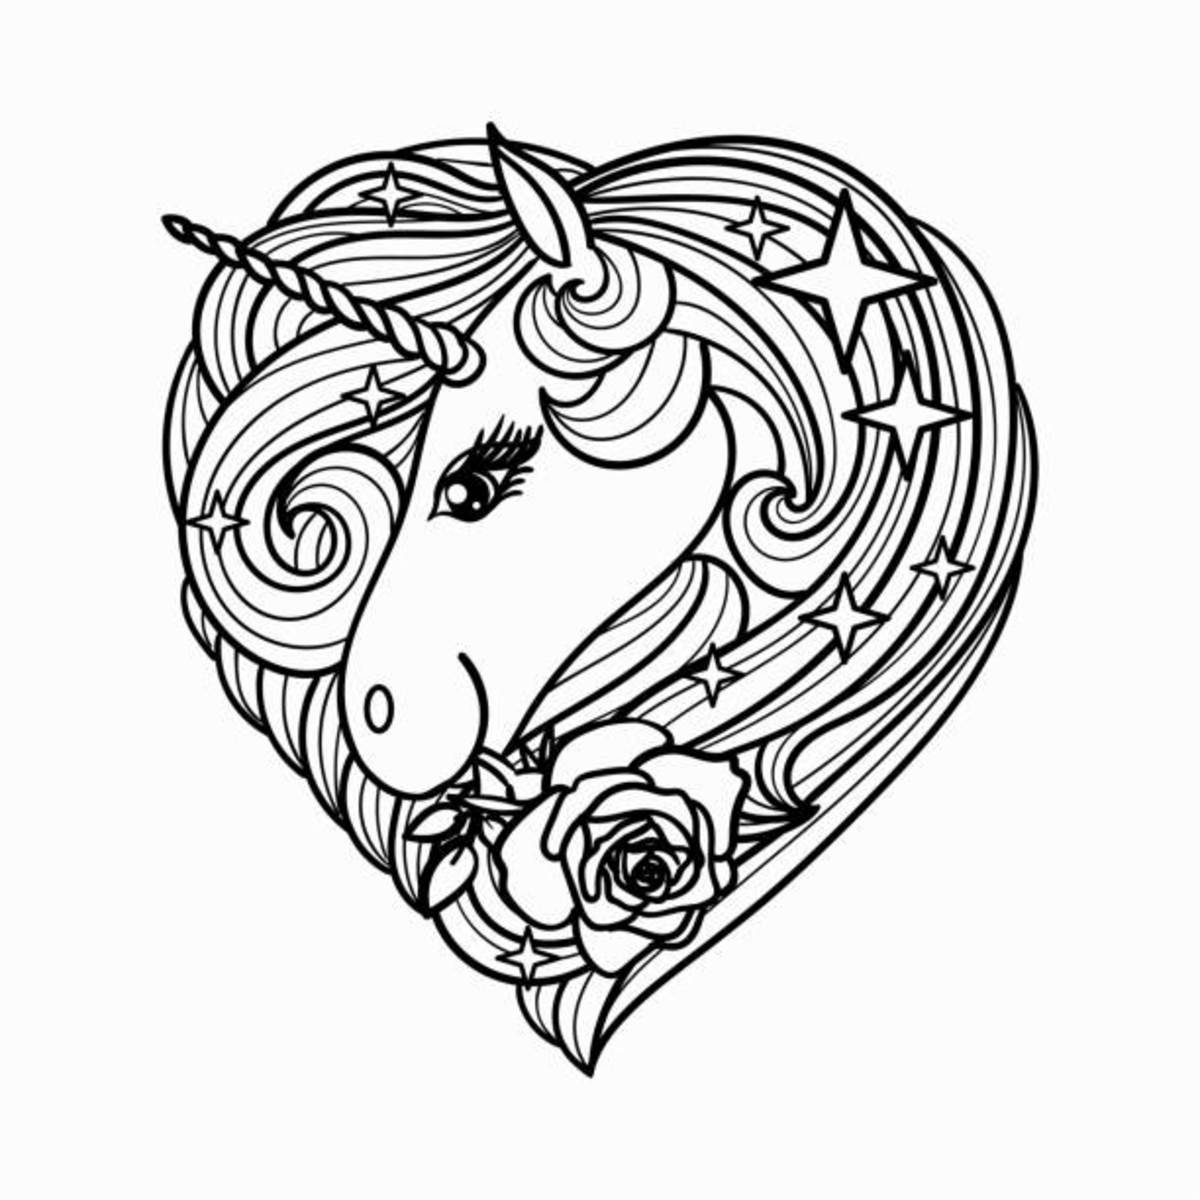 Unicorn coloring pages free printable sheets for kids